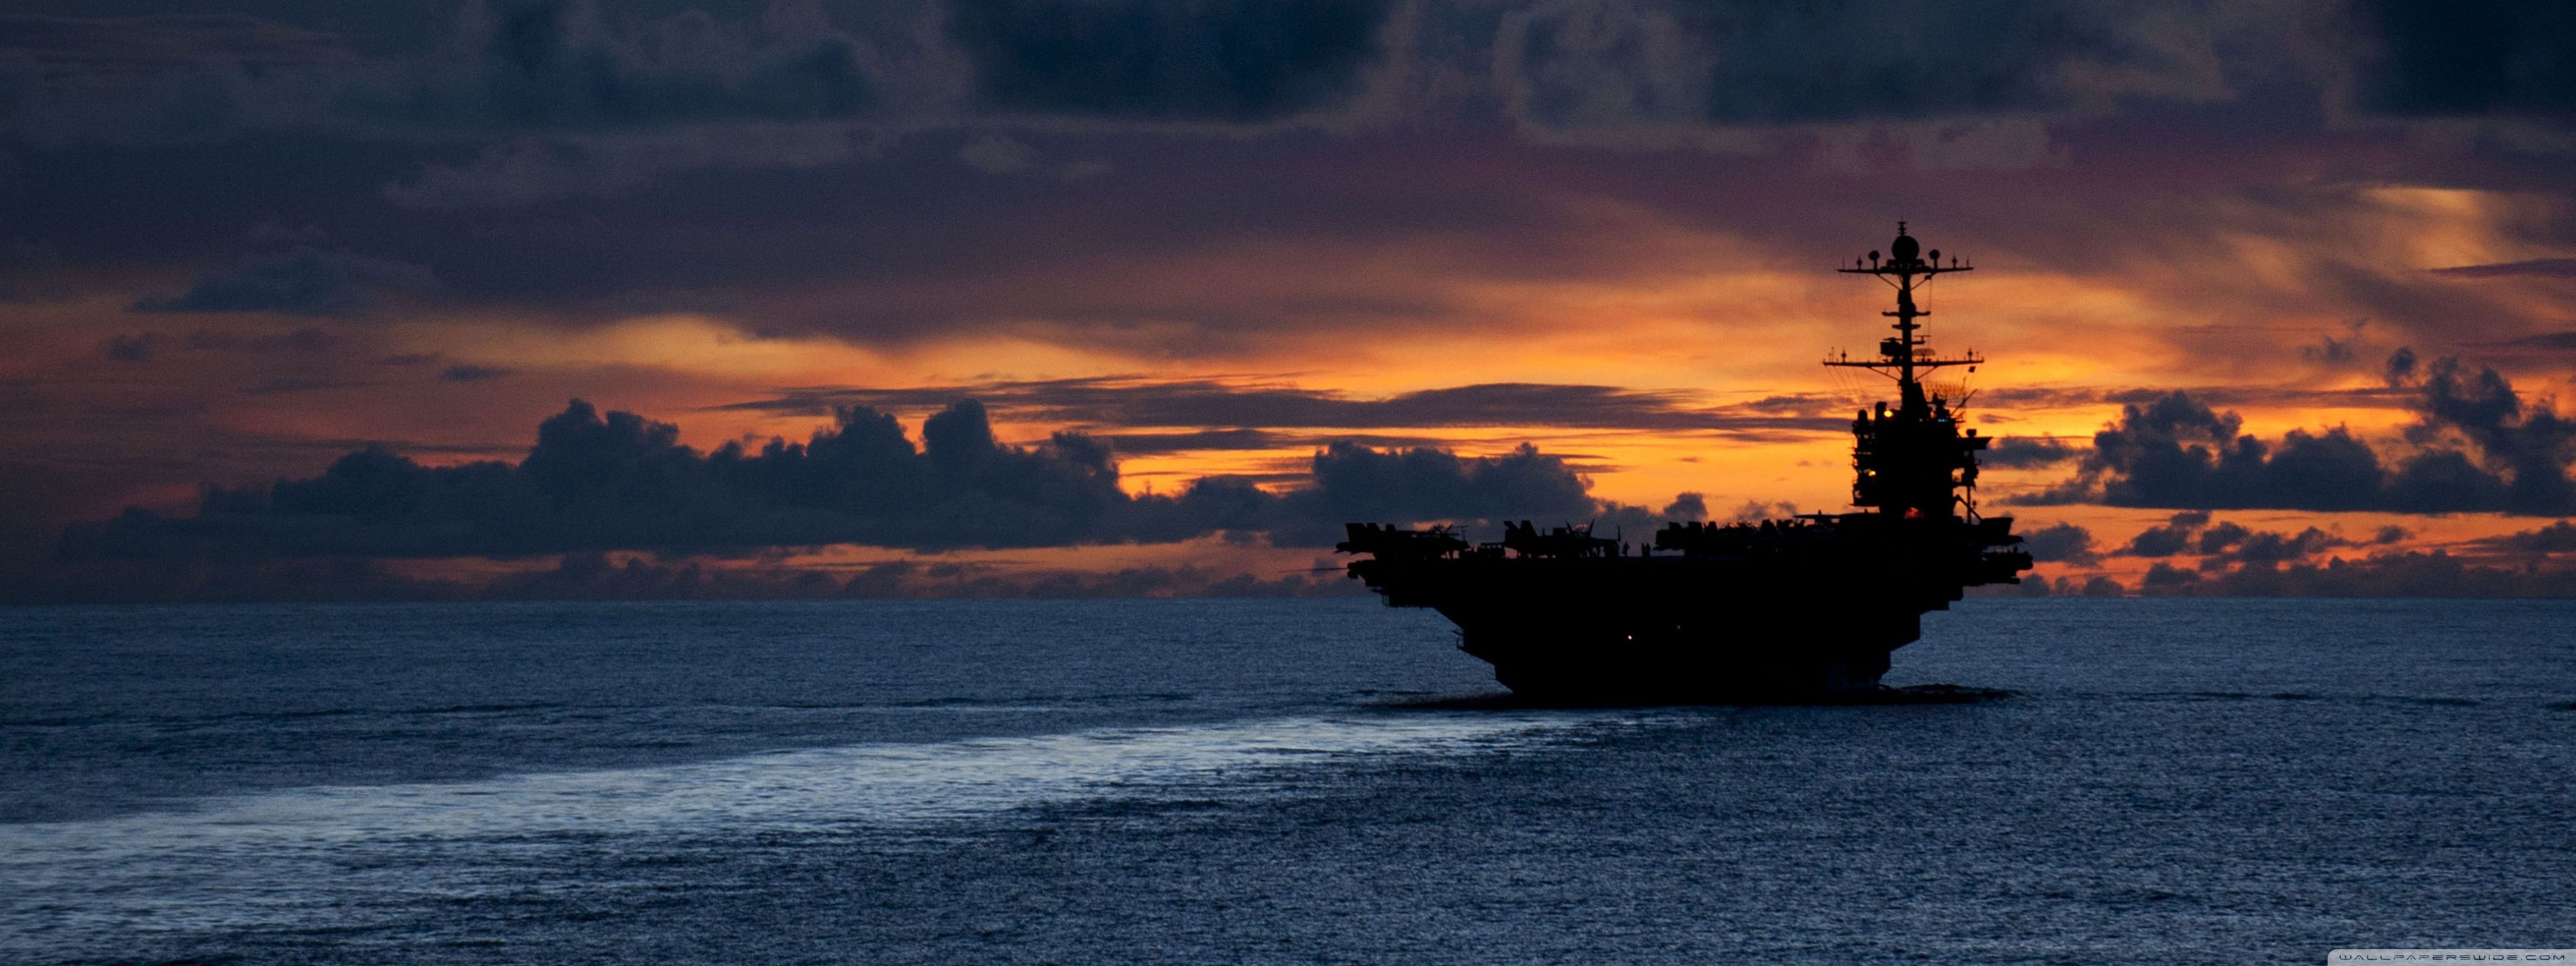 Aircraft Carrier At Sunset Ultra HD Desktop Background Wallpaper for: Multi Display, Dual Monitor, Tablet